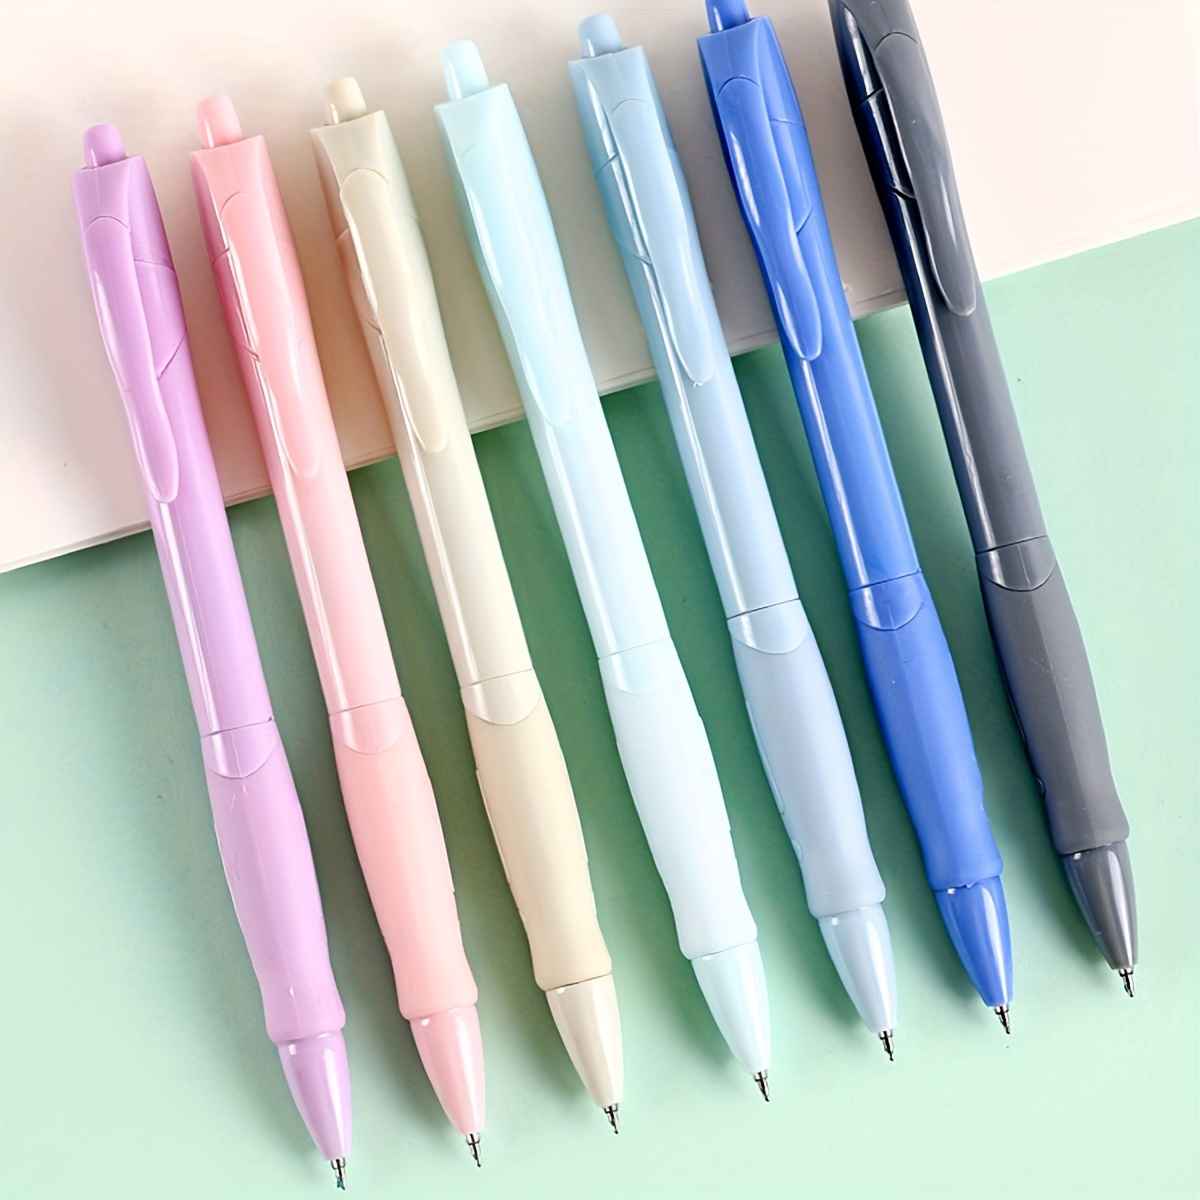  BEMLP Gel Ink Pen Extra Fine Point Pens Ballpoint Pen 0.35mm  Blue Premium Liquid Ink Rollerball Pens Quick-Drying For Japanese Office  School Stationery Supply 12 Pieces : Office Products